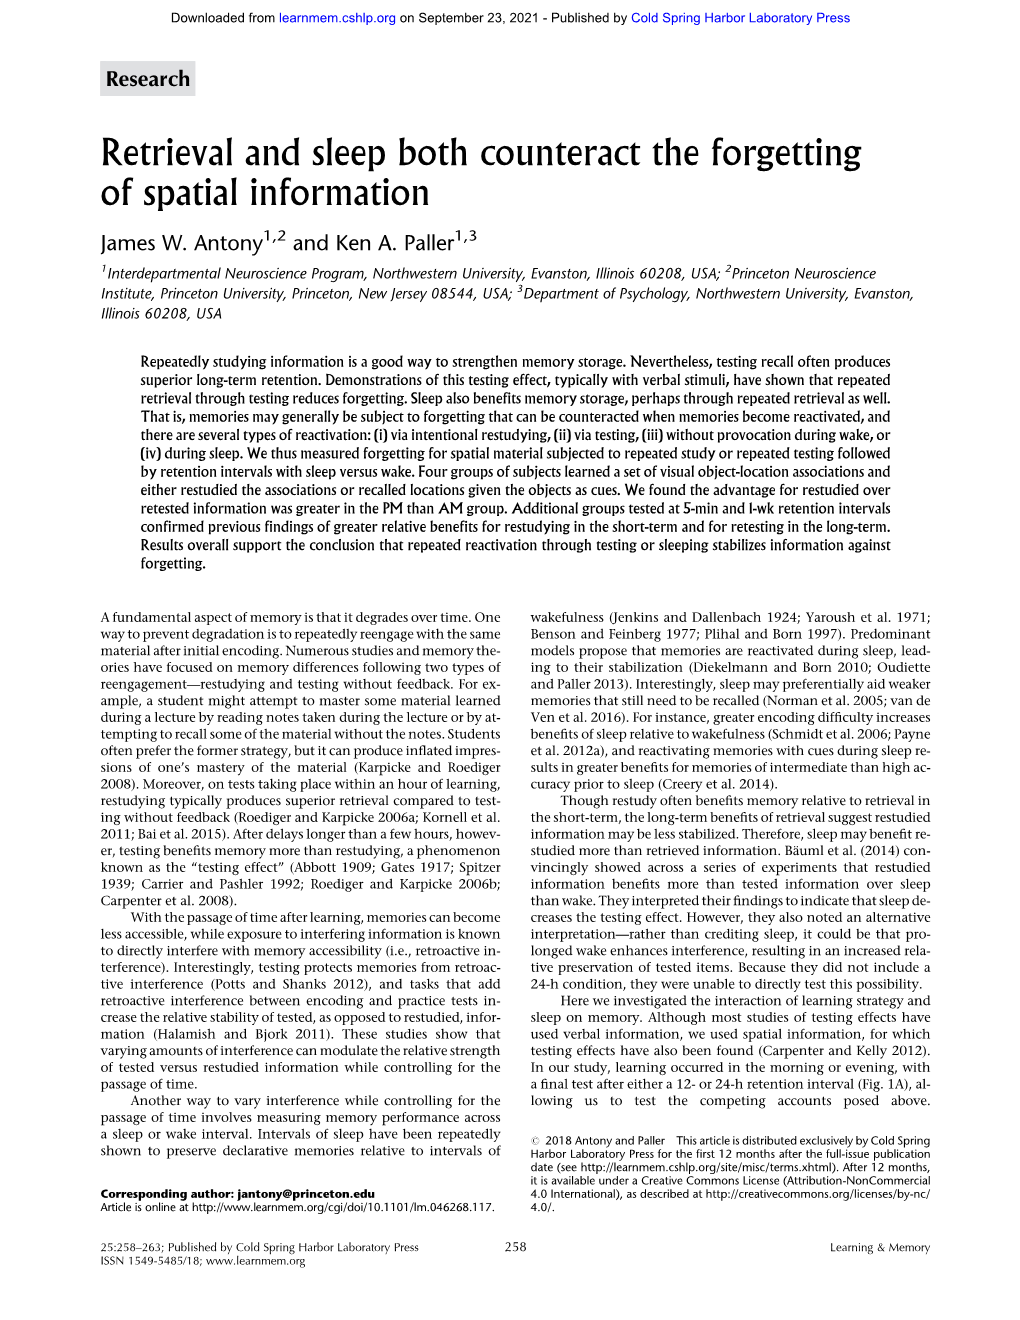 Retrieval and Sleep Both Counteract the Forgetting of Spatial Information